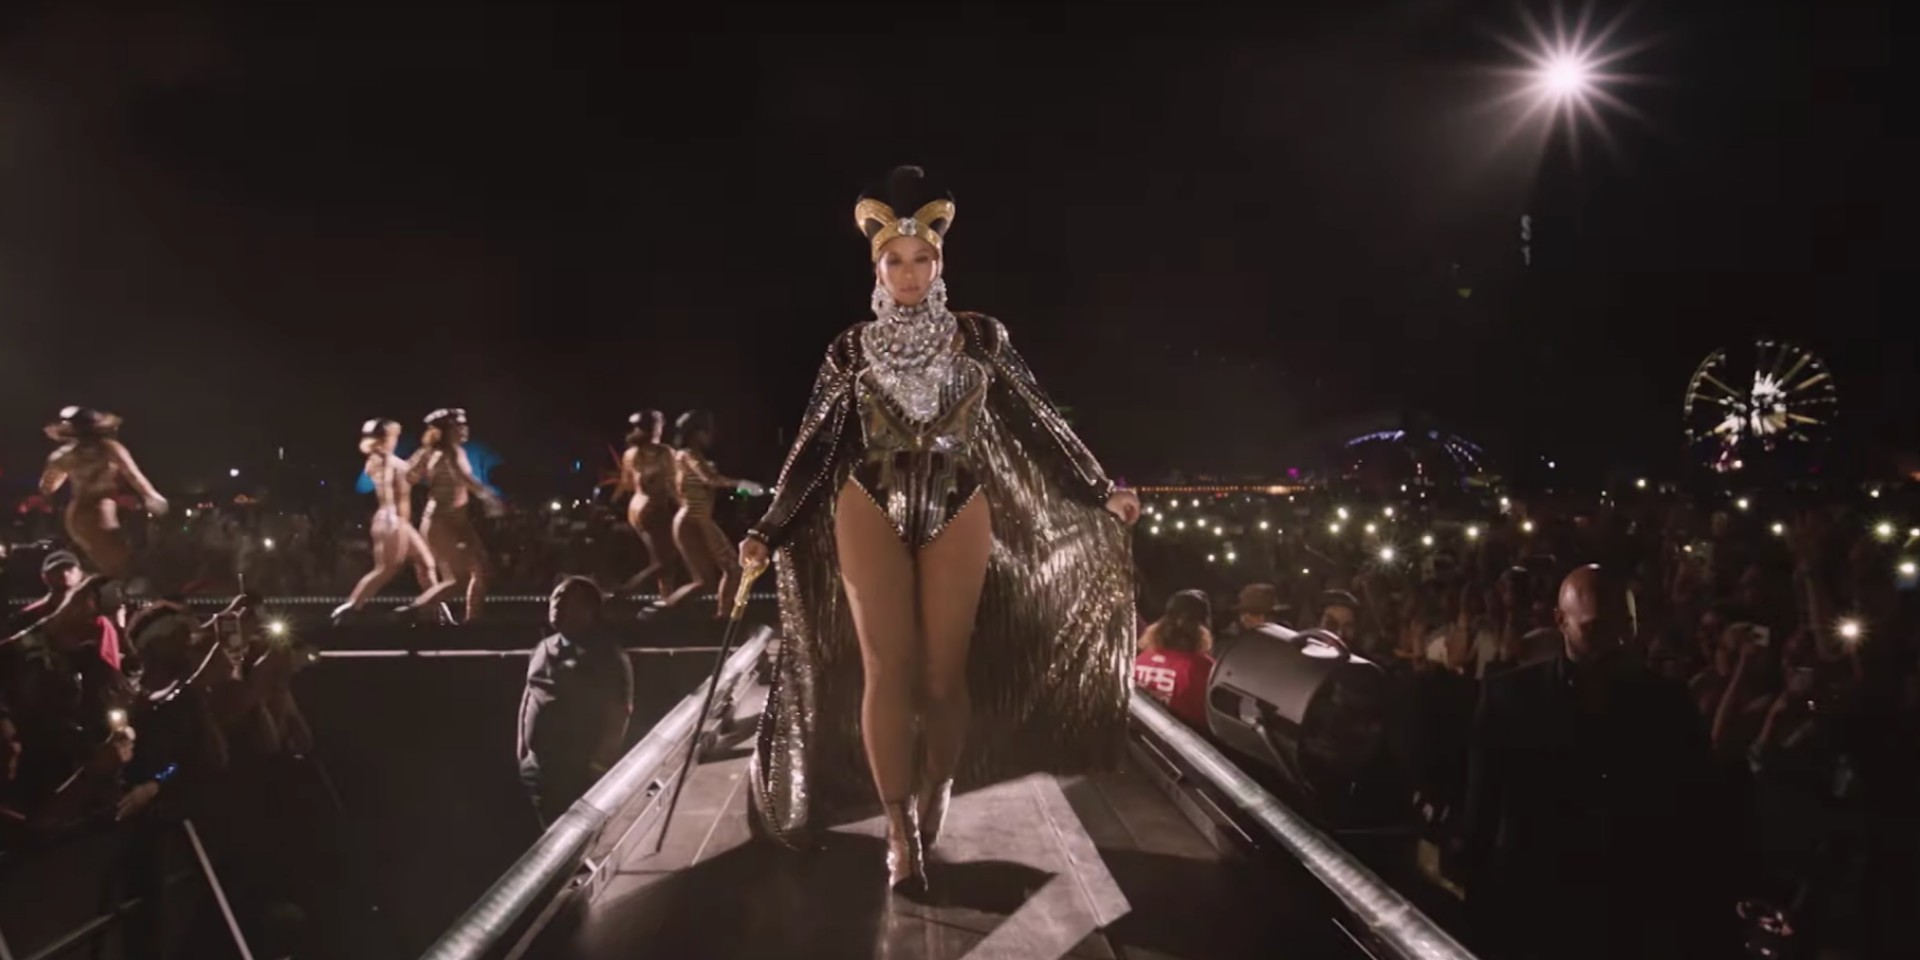 Get a first look at Beyoncé's Netflix documentary, Homecoming – watch